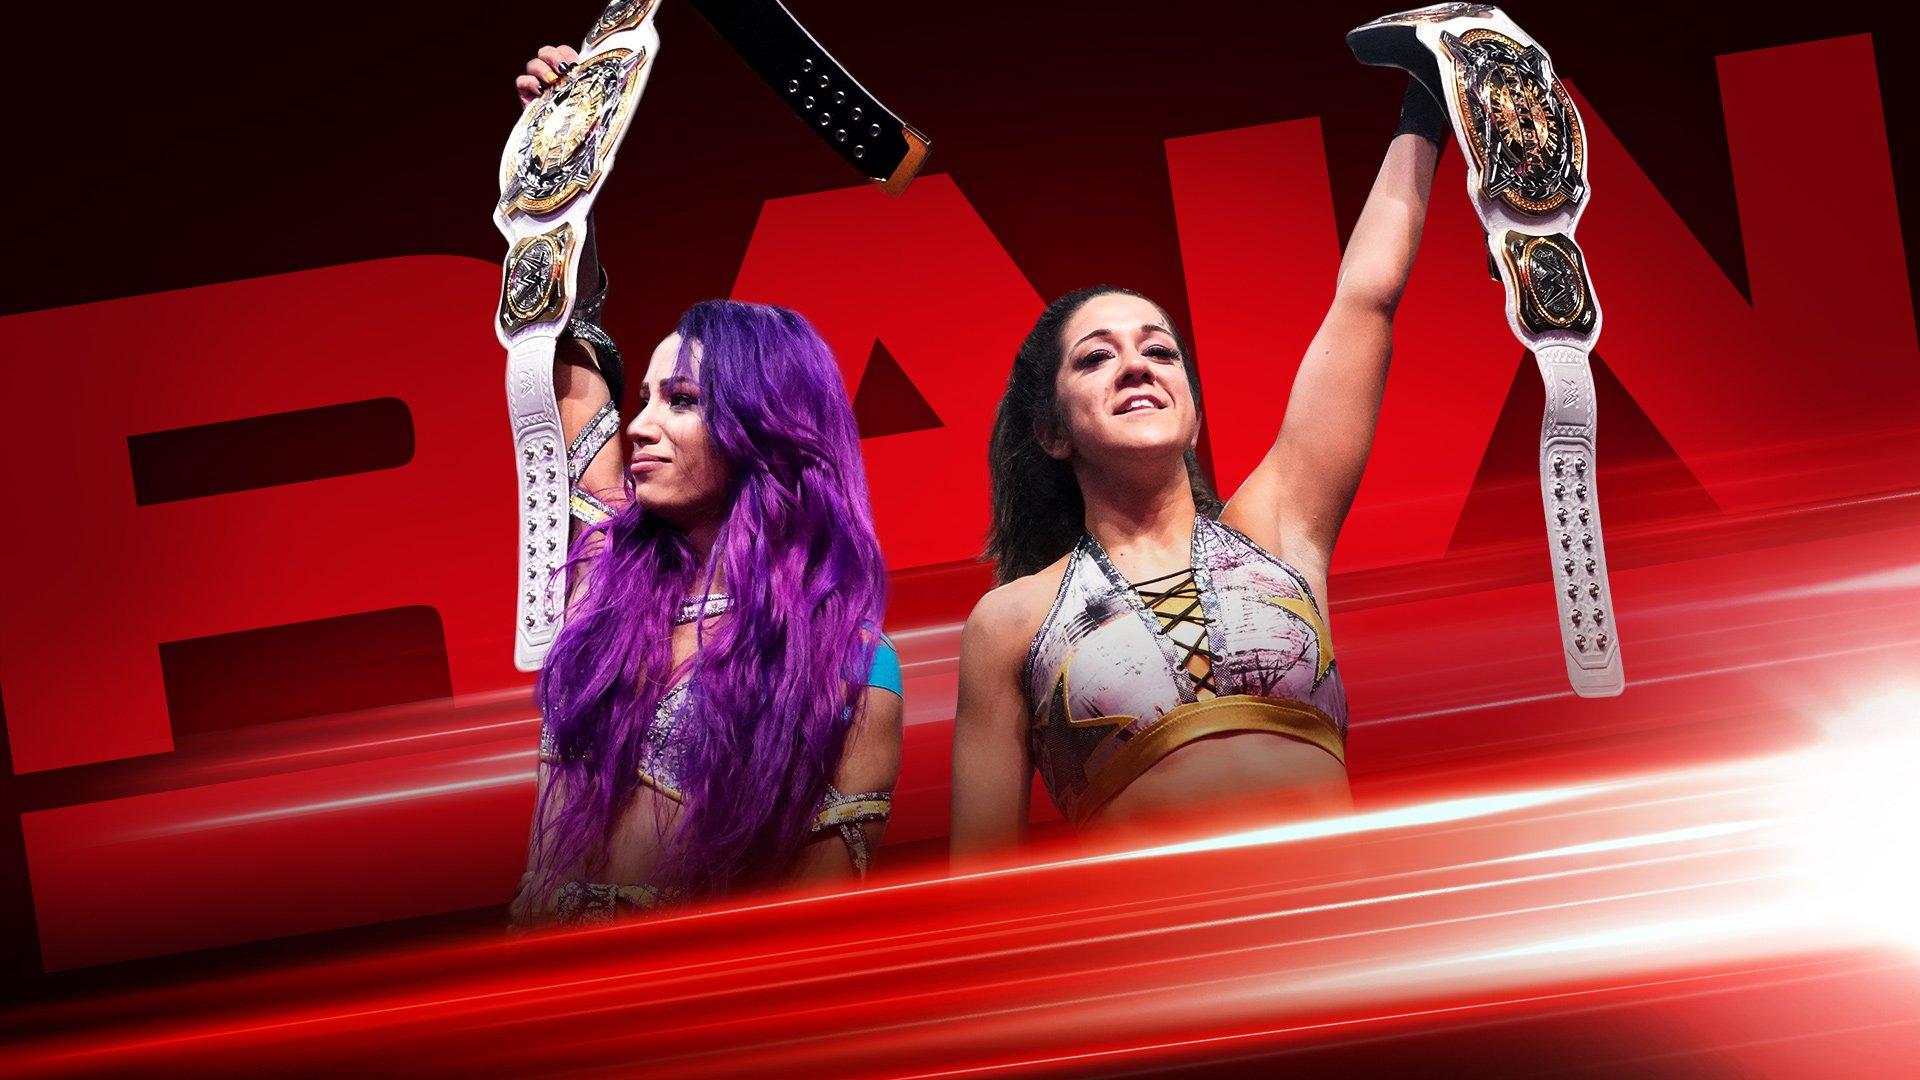 Here Is What You Can Expect To See On Tonight's Episode Of WWE RAW From